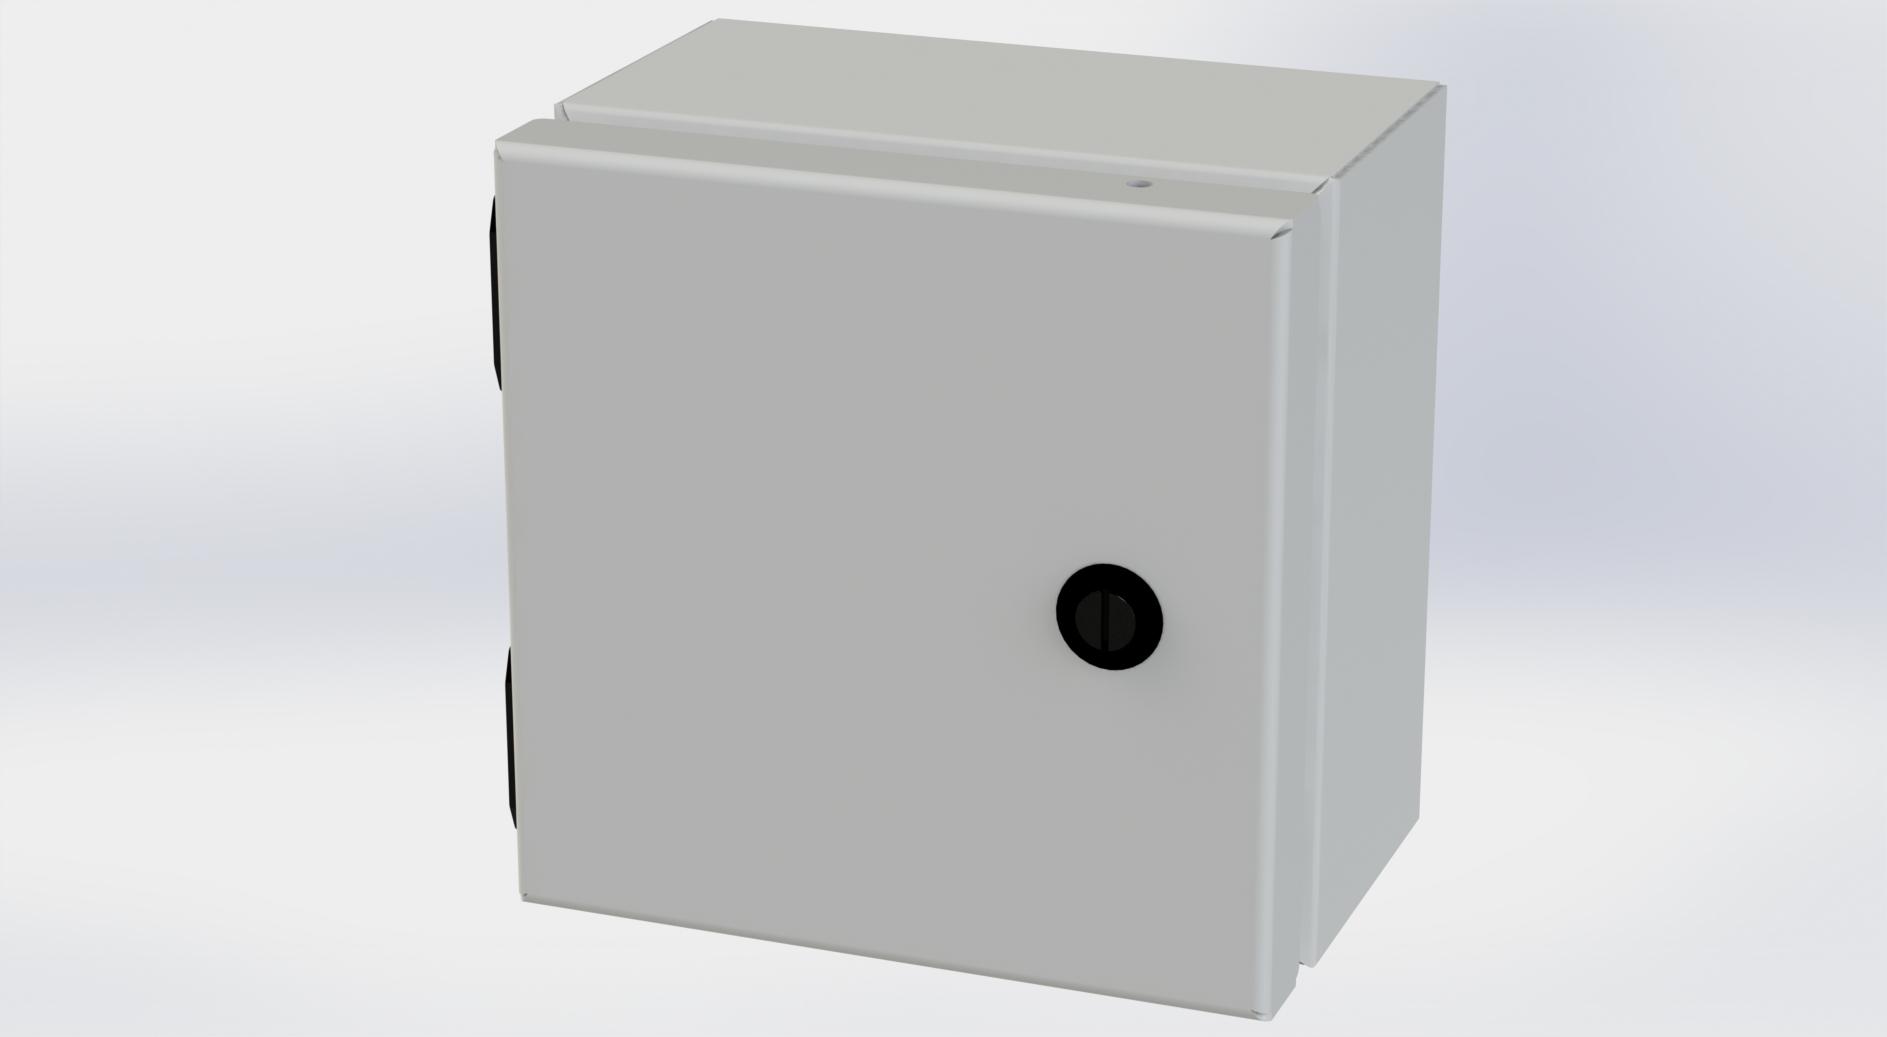 Saginaw Control SCE-606ELJLG ELJ Enclosure, Height:6.00", Width:6.00", Depth:4.00", RAL 7035 gray powder coating inside and out. Optional sub-panels are powder coated white.